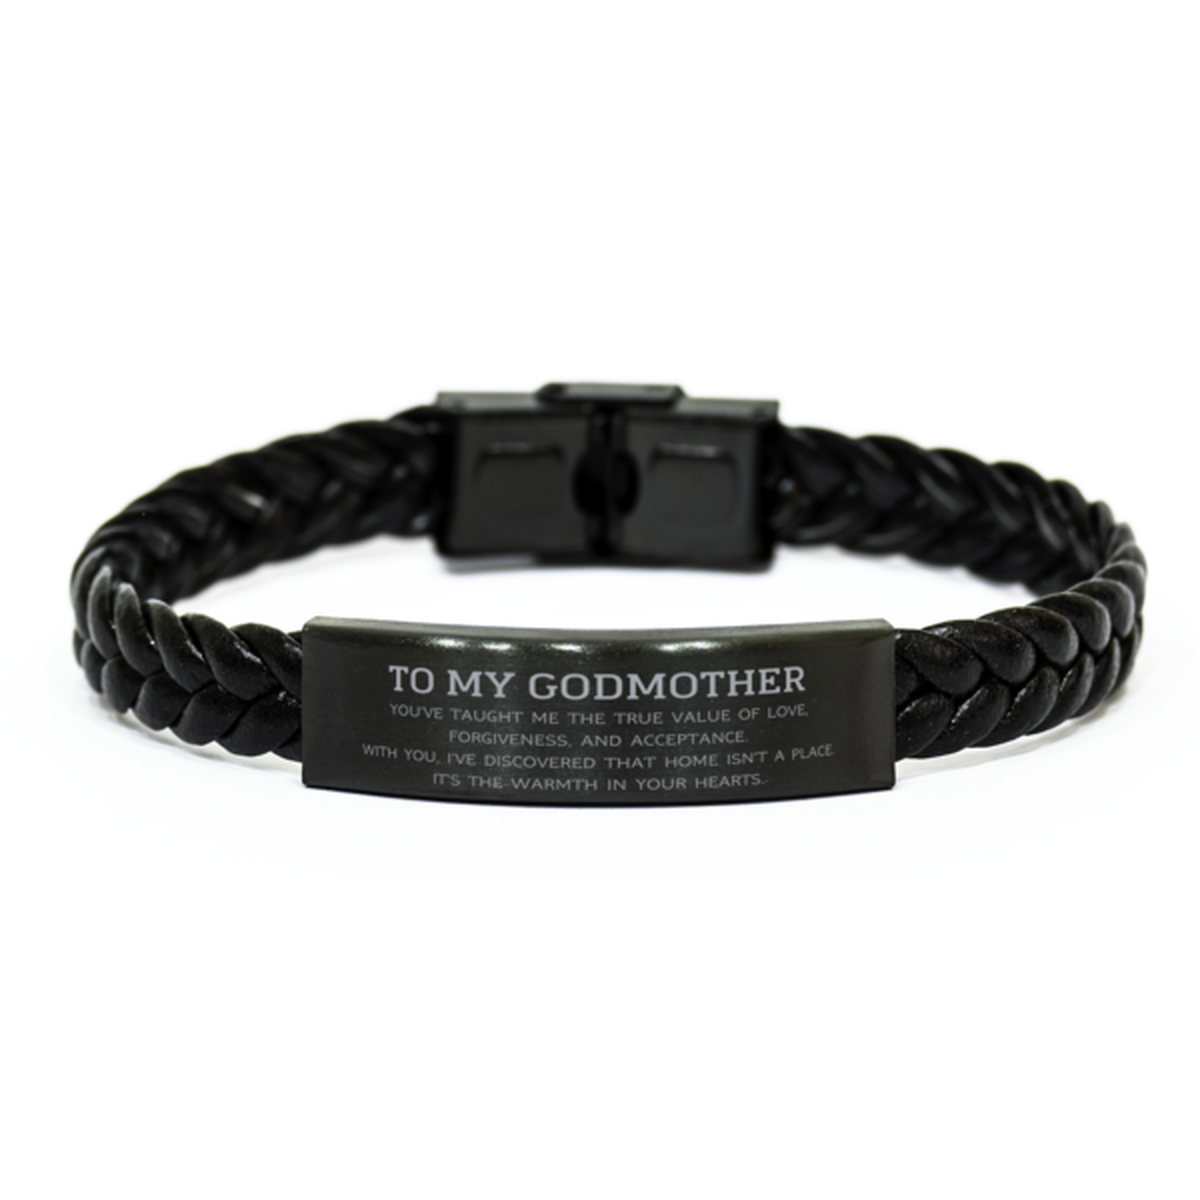 To My Godmother Gifts, You've taught me the true value of love, Thank You Gifts For Godmother, Birthday Braided Leather Bracelet For Godmother